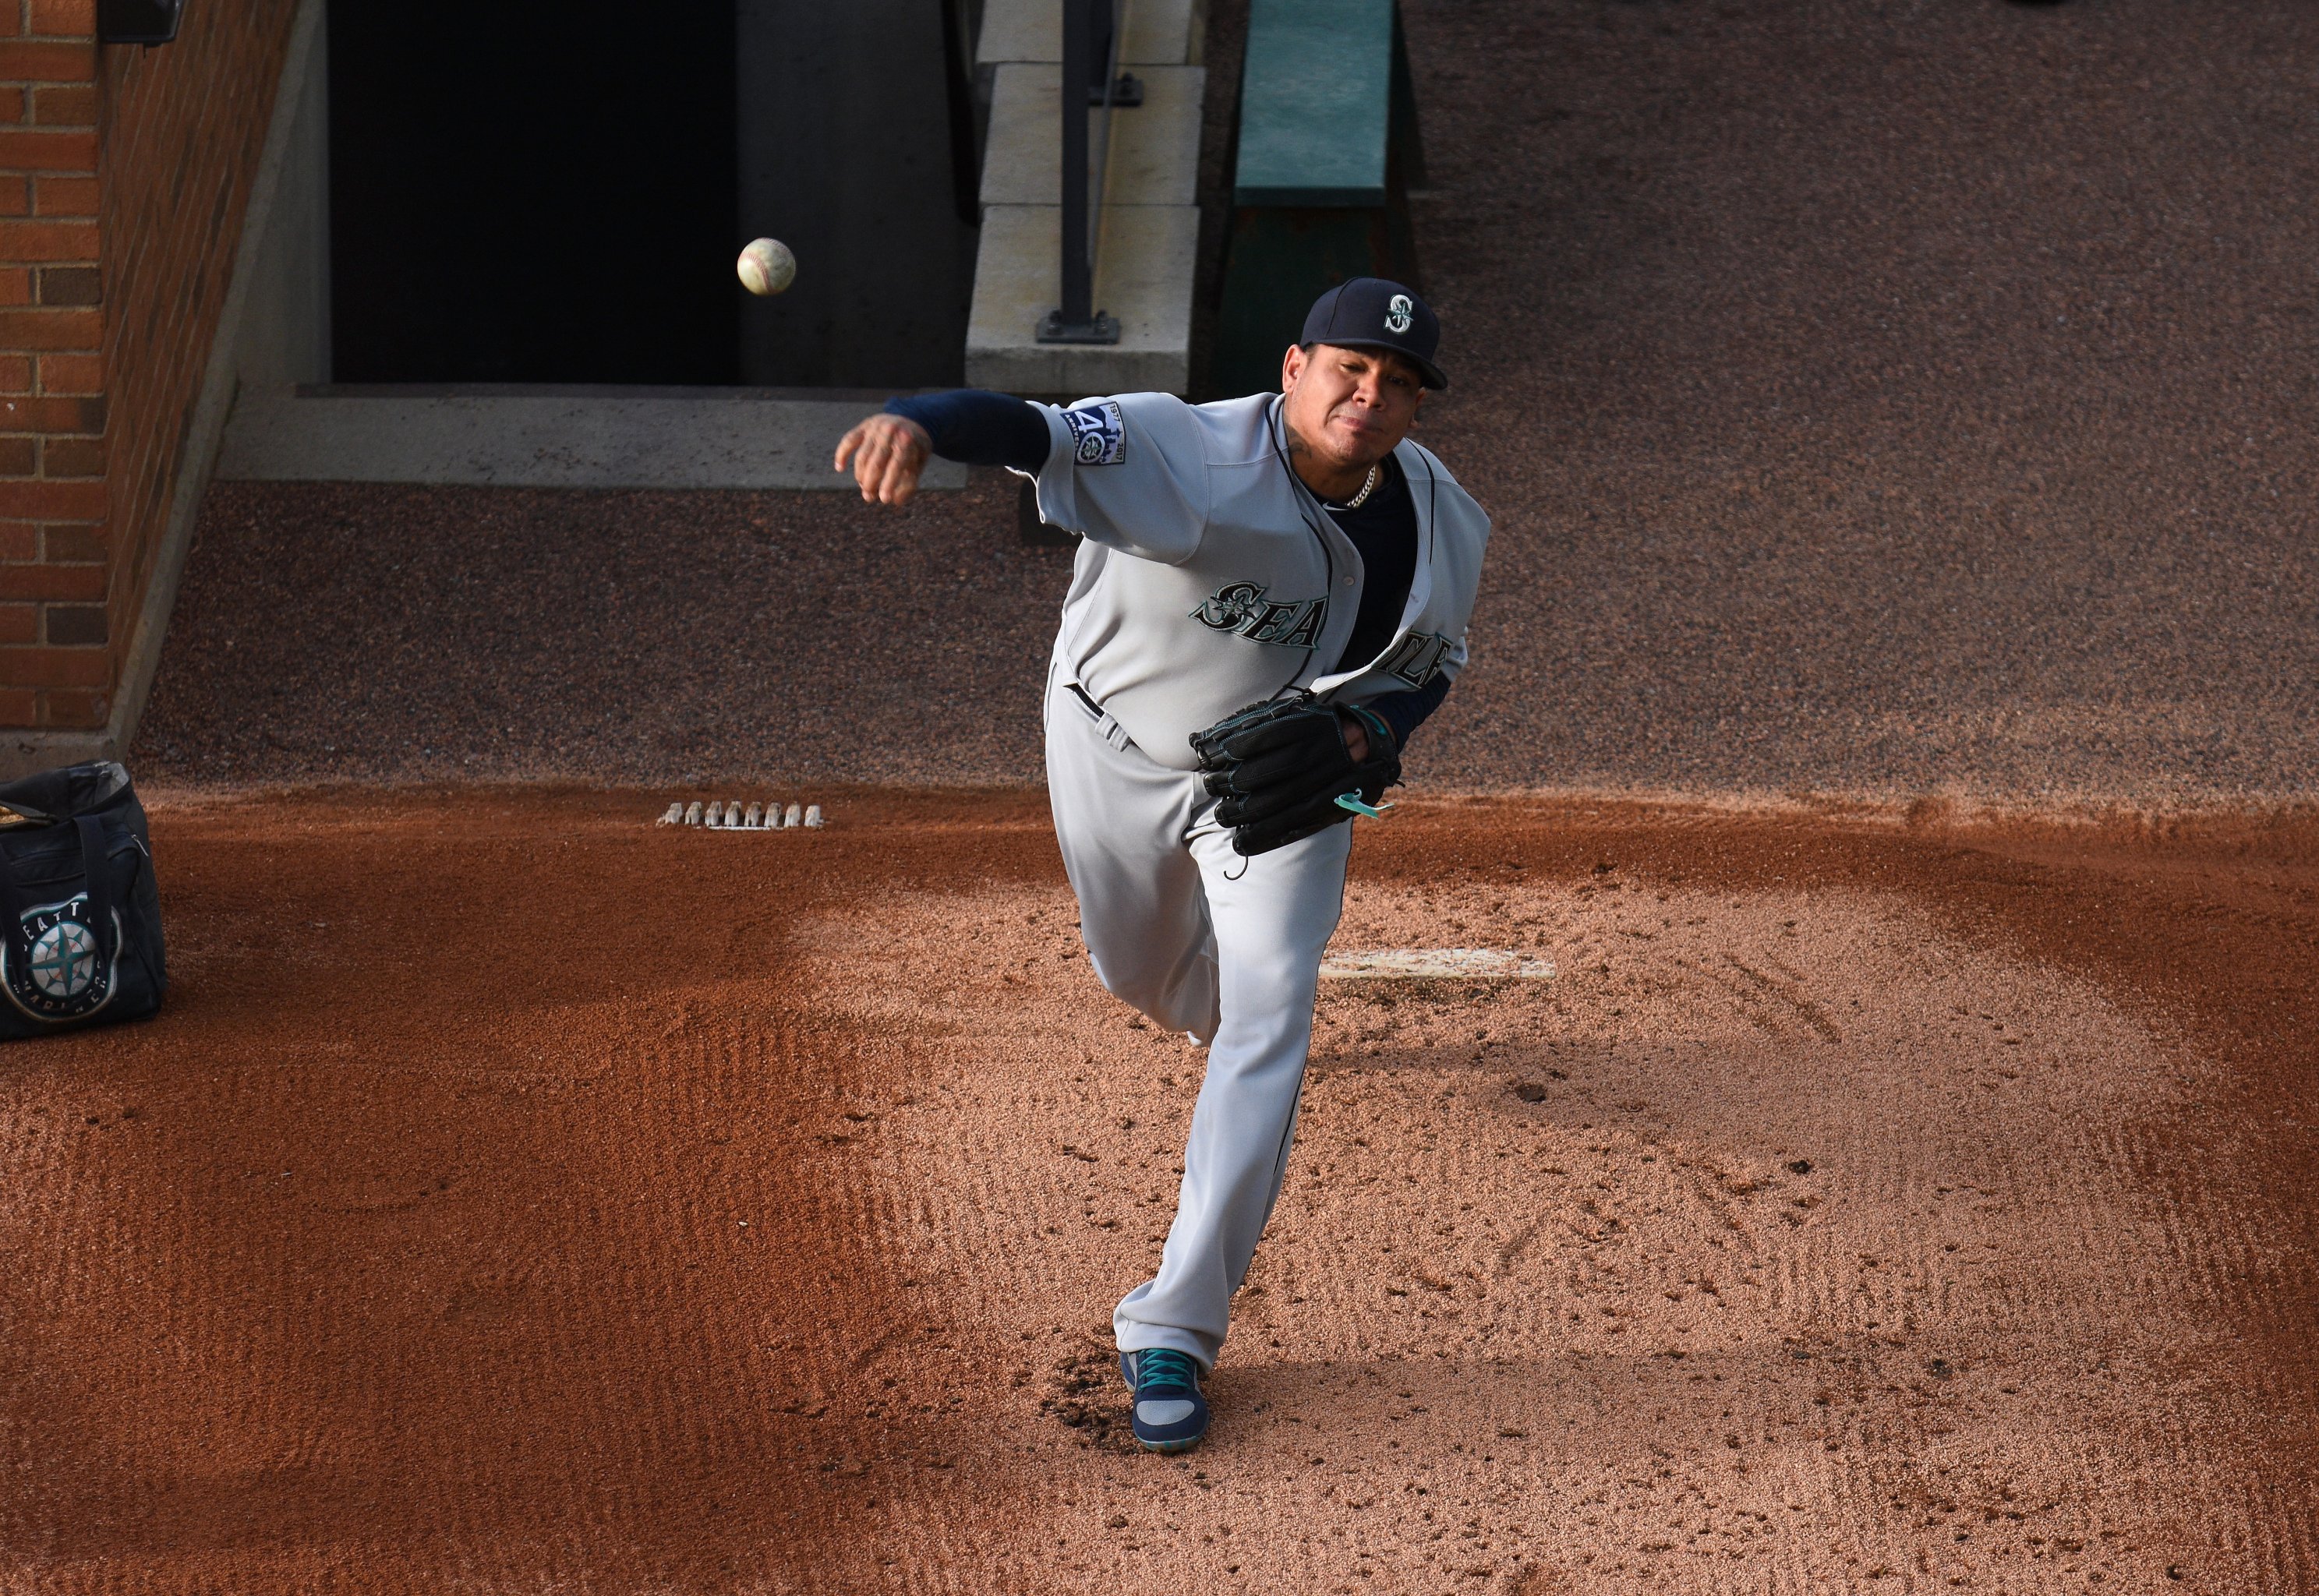 Seattle Mariners: Felix Hernandez isn't hanging up the cleats just yet